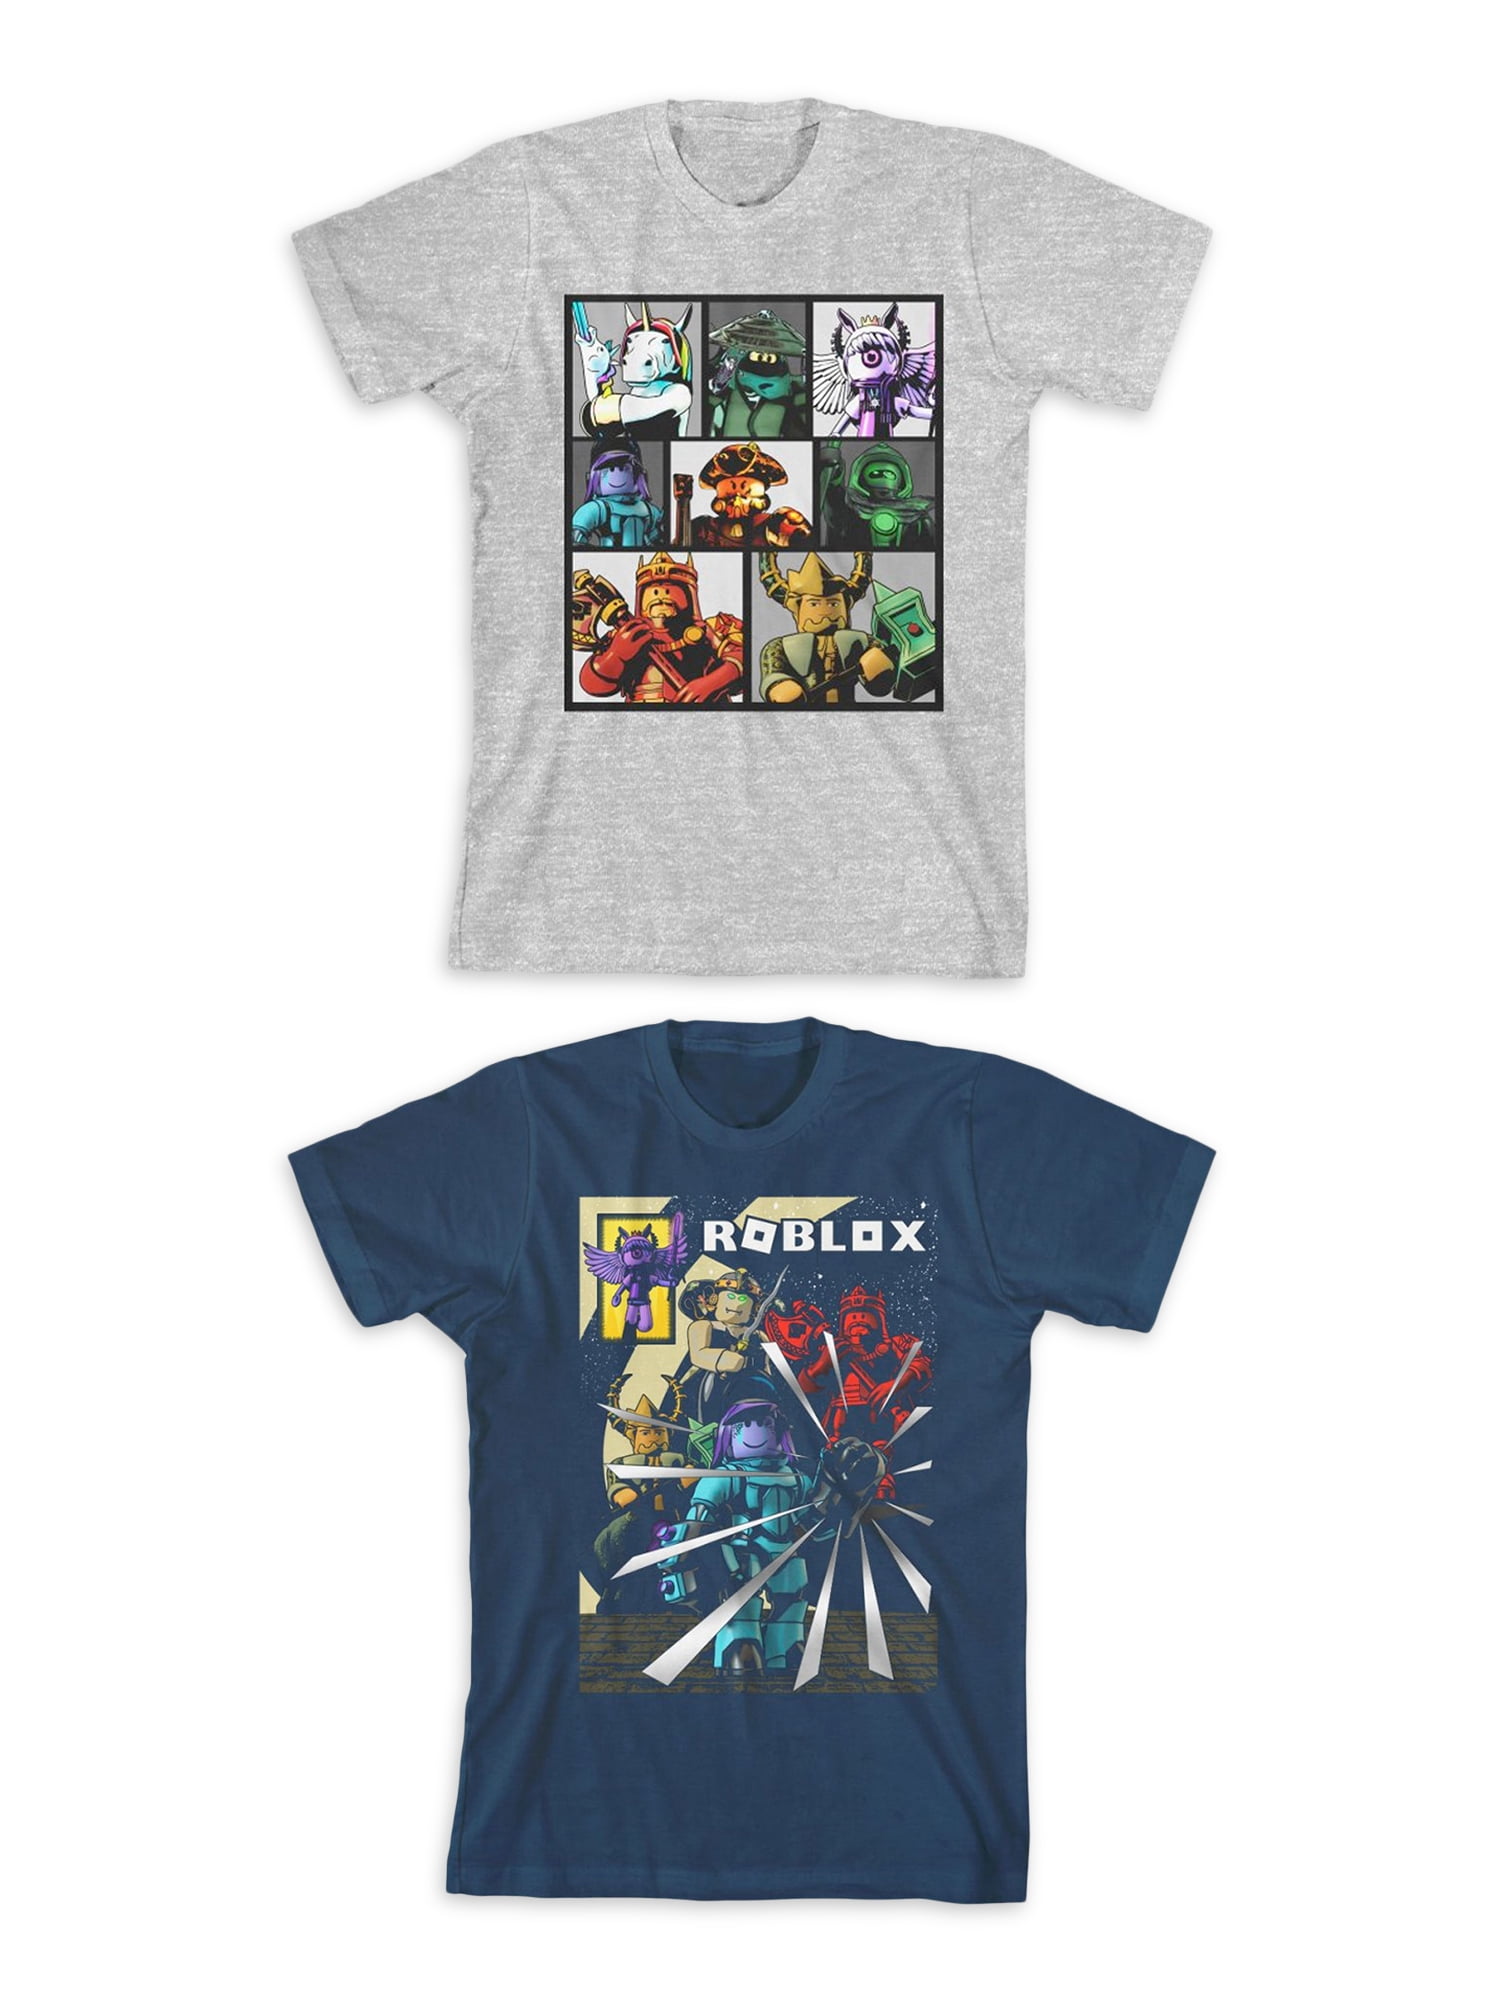 Roblox Roblox Boys Short Sleeve Graphic T Shirts 2 Pack Size 4 18 Walmart Com Walmart Com - roblox growing up age 18 motorcycle parts location